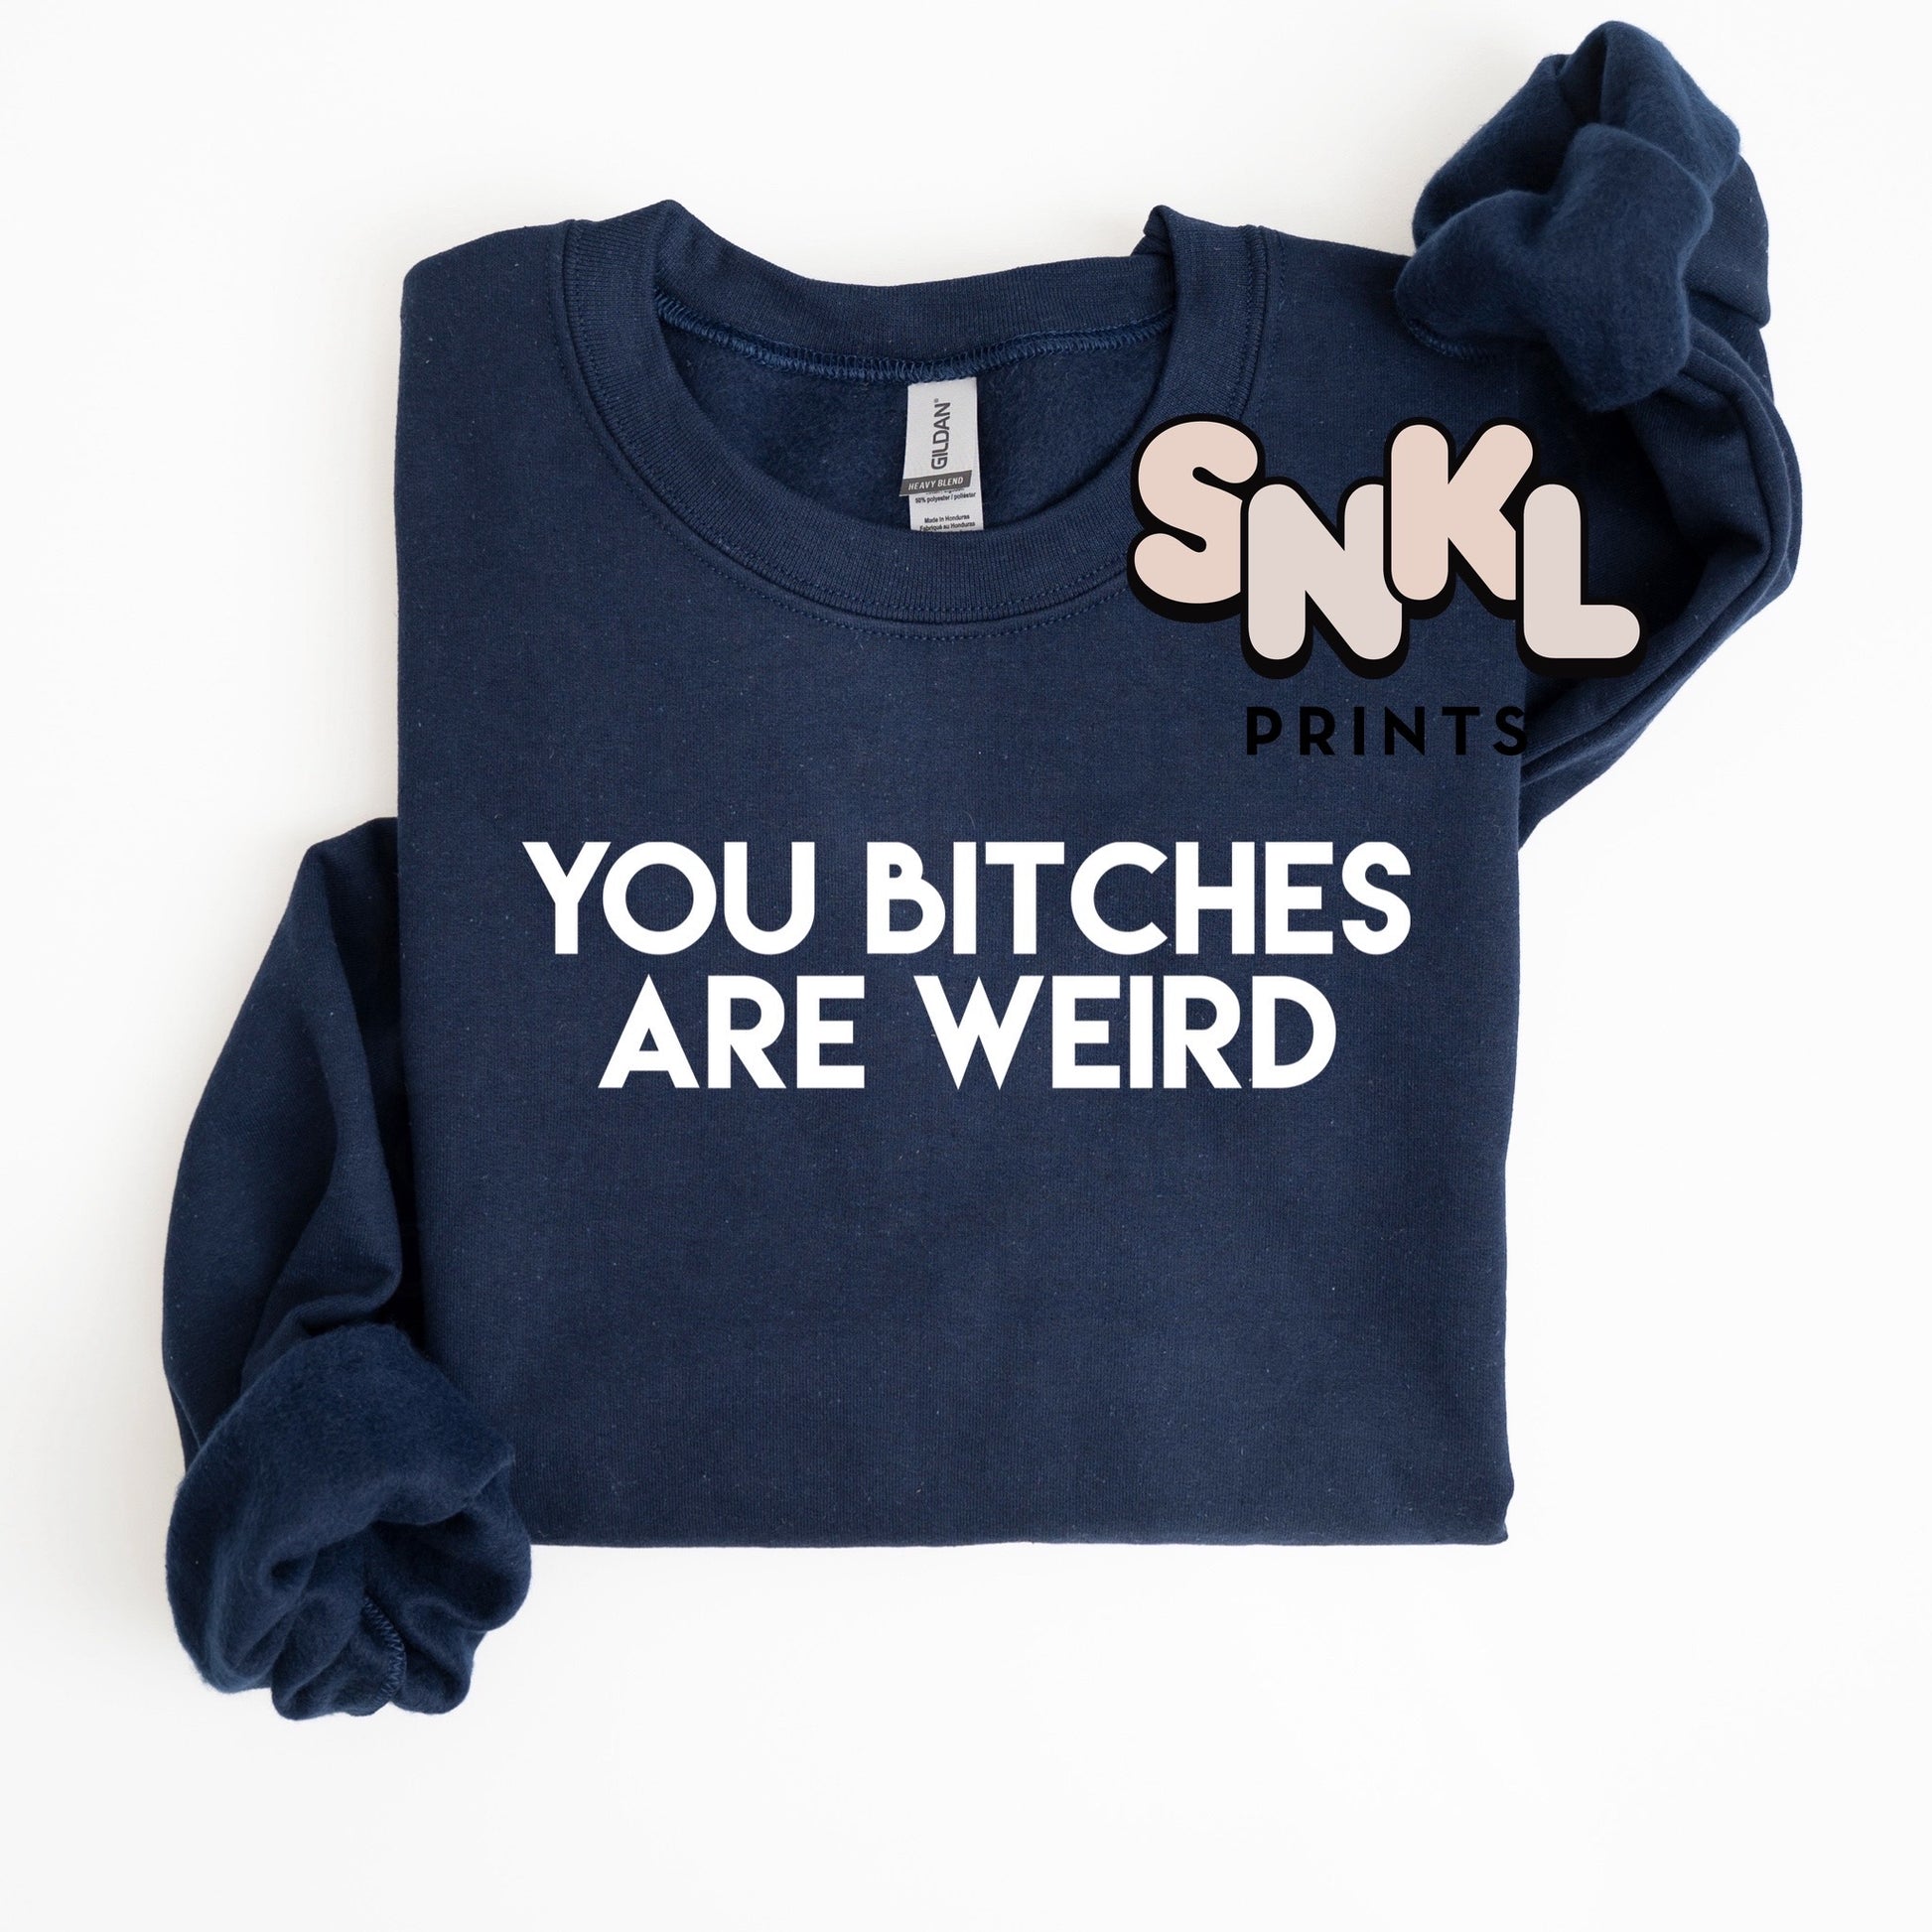 You Bitches Are Weird - SNKL Prints